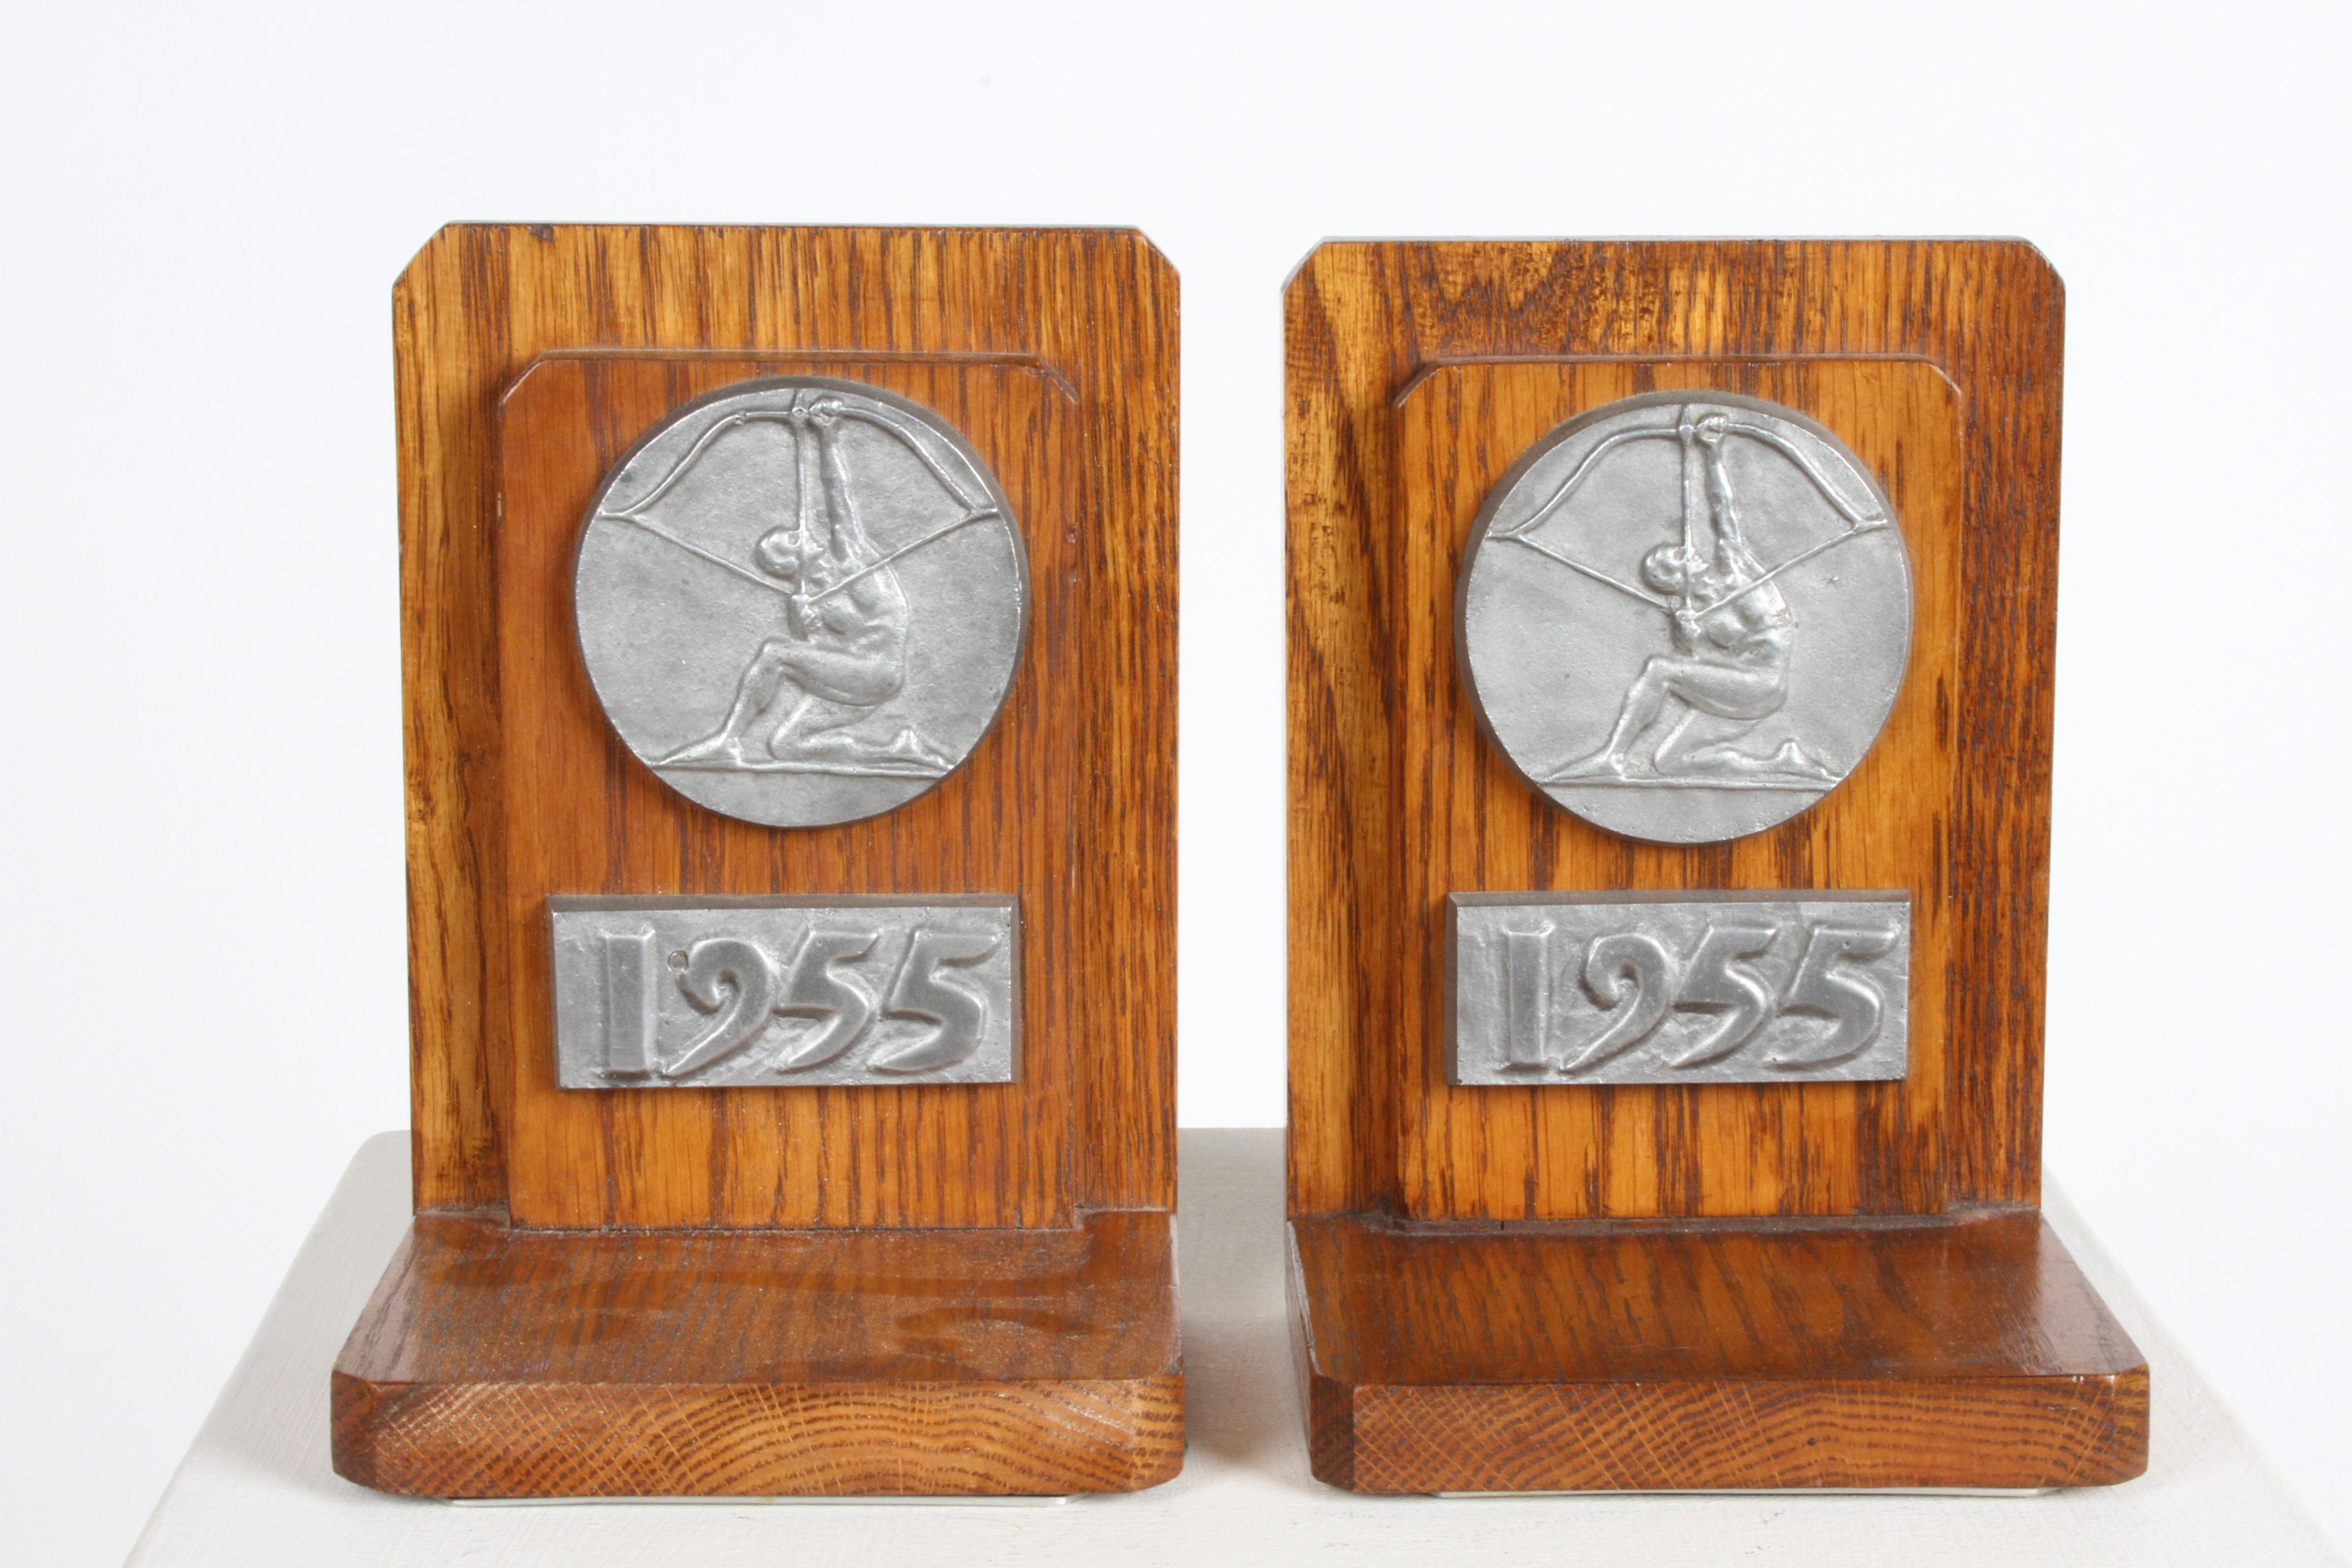 Rare pair of bookends with cast aluminum seal of Cranbrook School - Aim High logo and the year 1955 mounted to the oak boards. The Aim High logo was designed by Eero Saarinen, son of Eliel Saarinen who designed the schools campus and was president